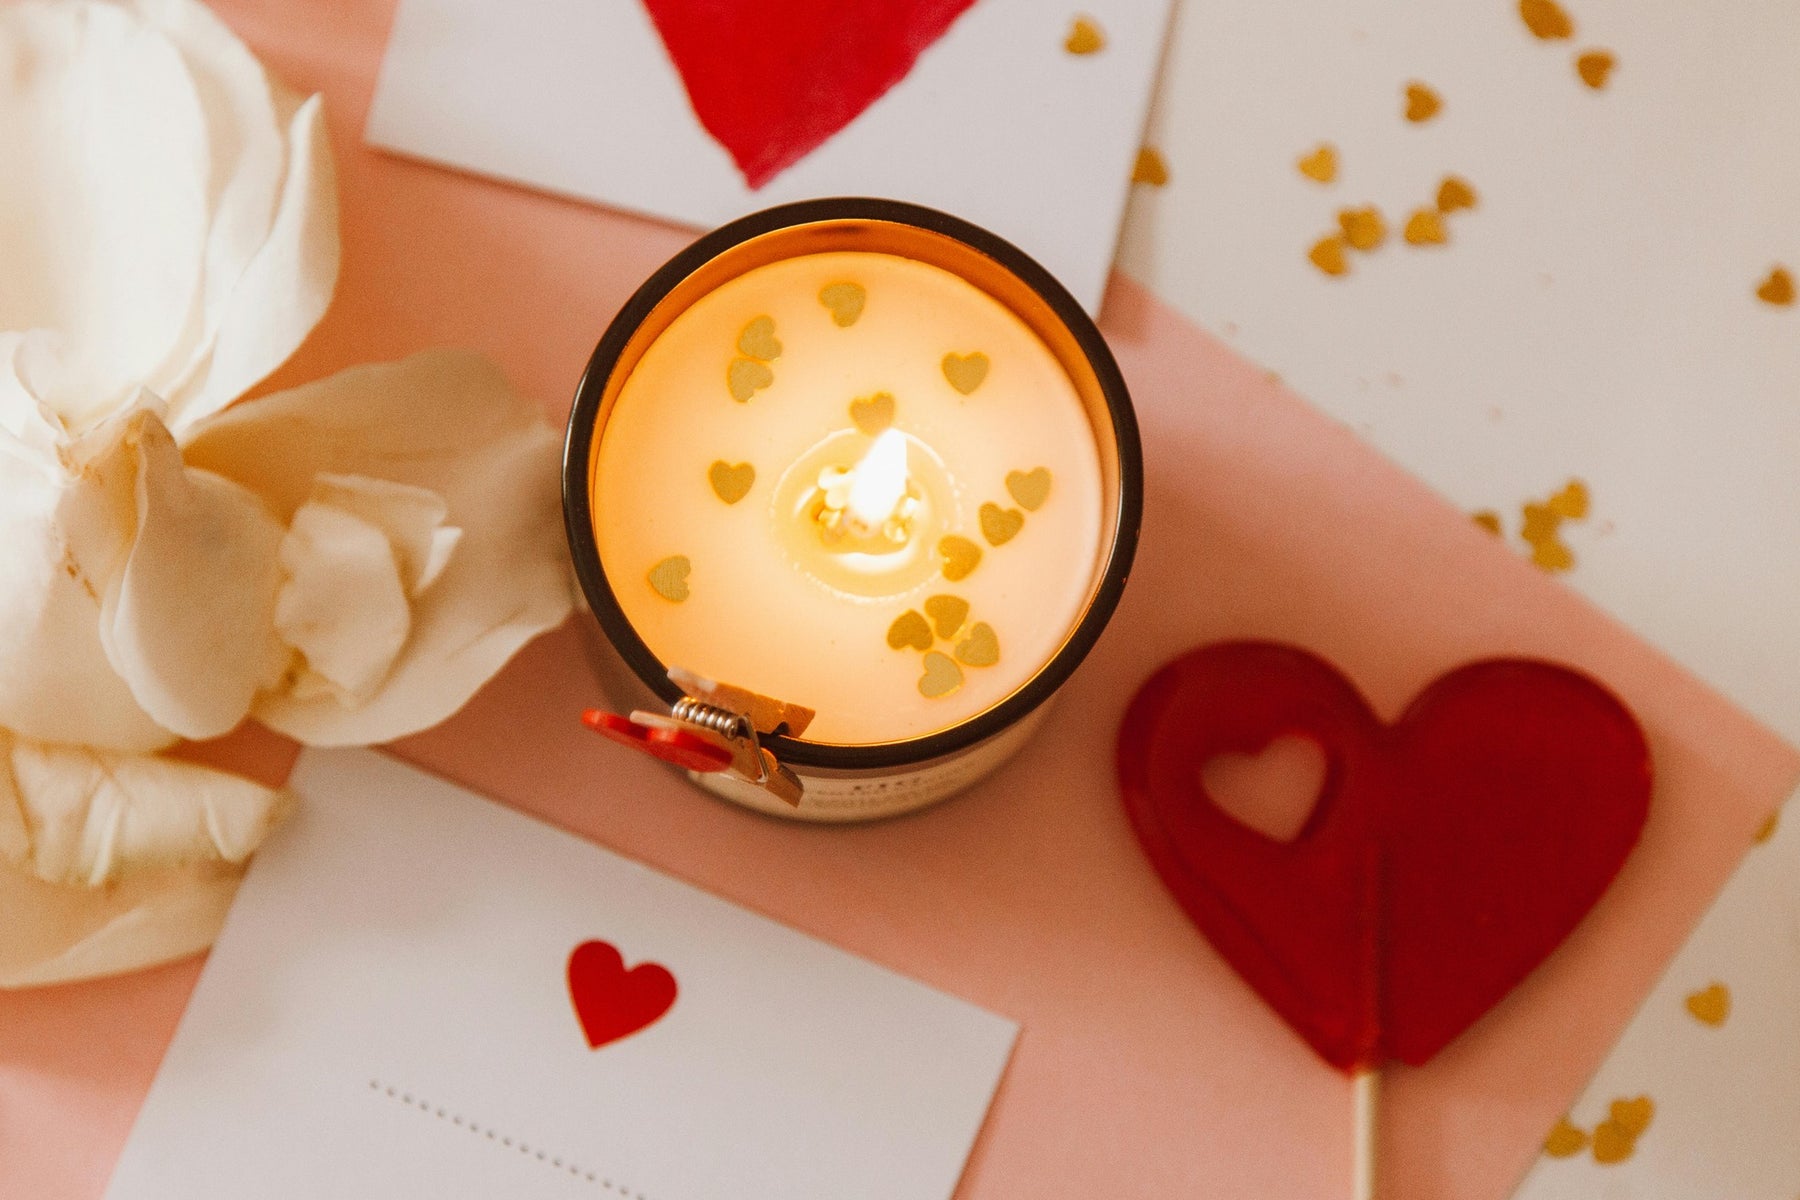 This year's top Scents for a Valentine's Home Fragrance Gift